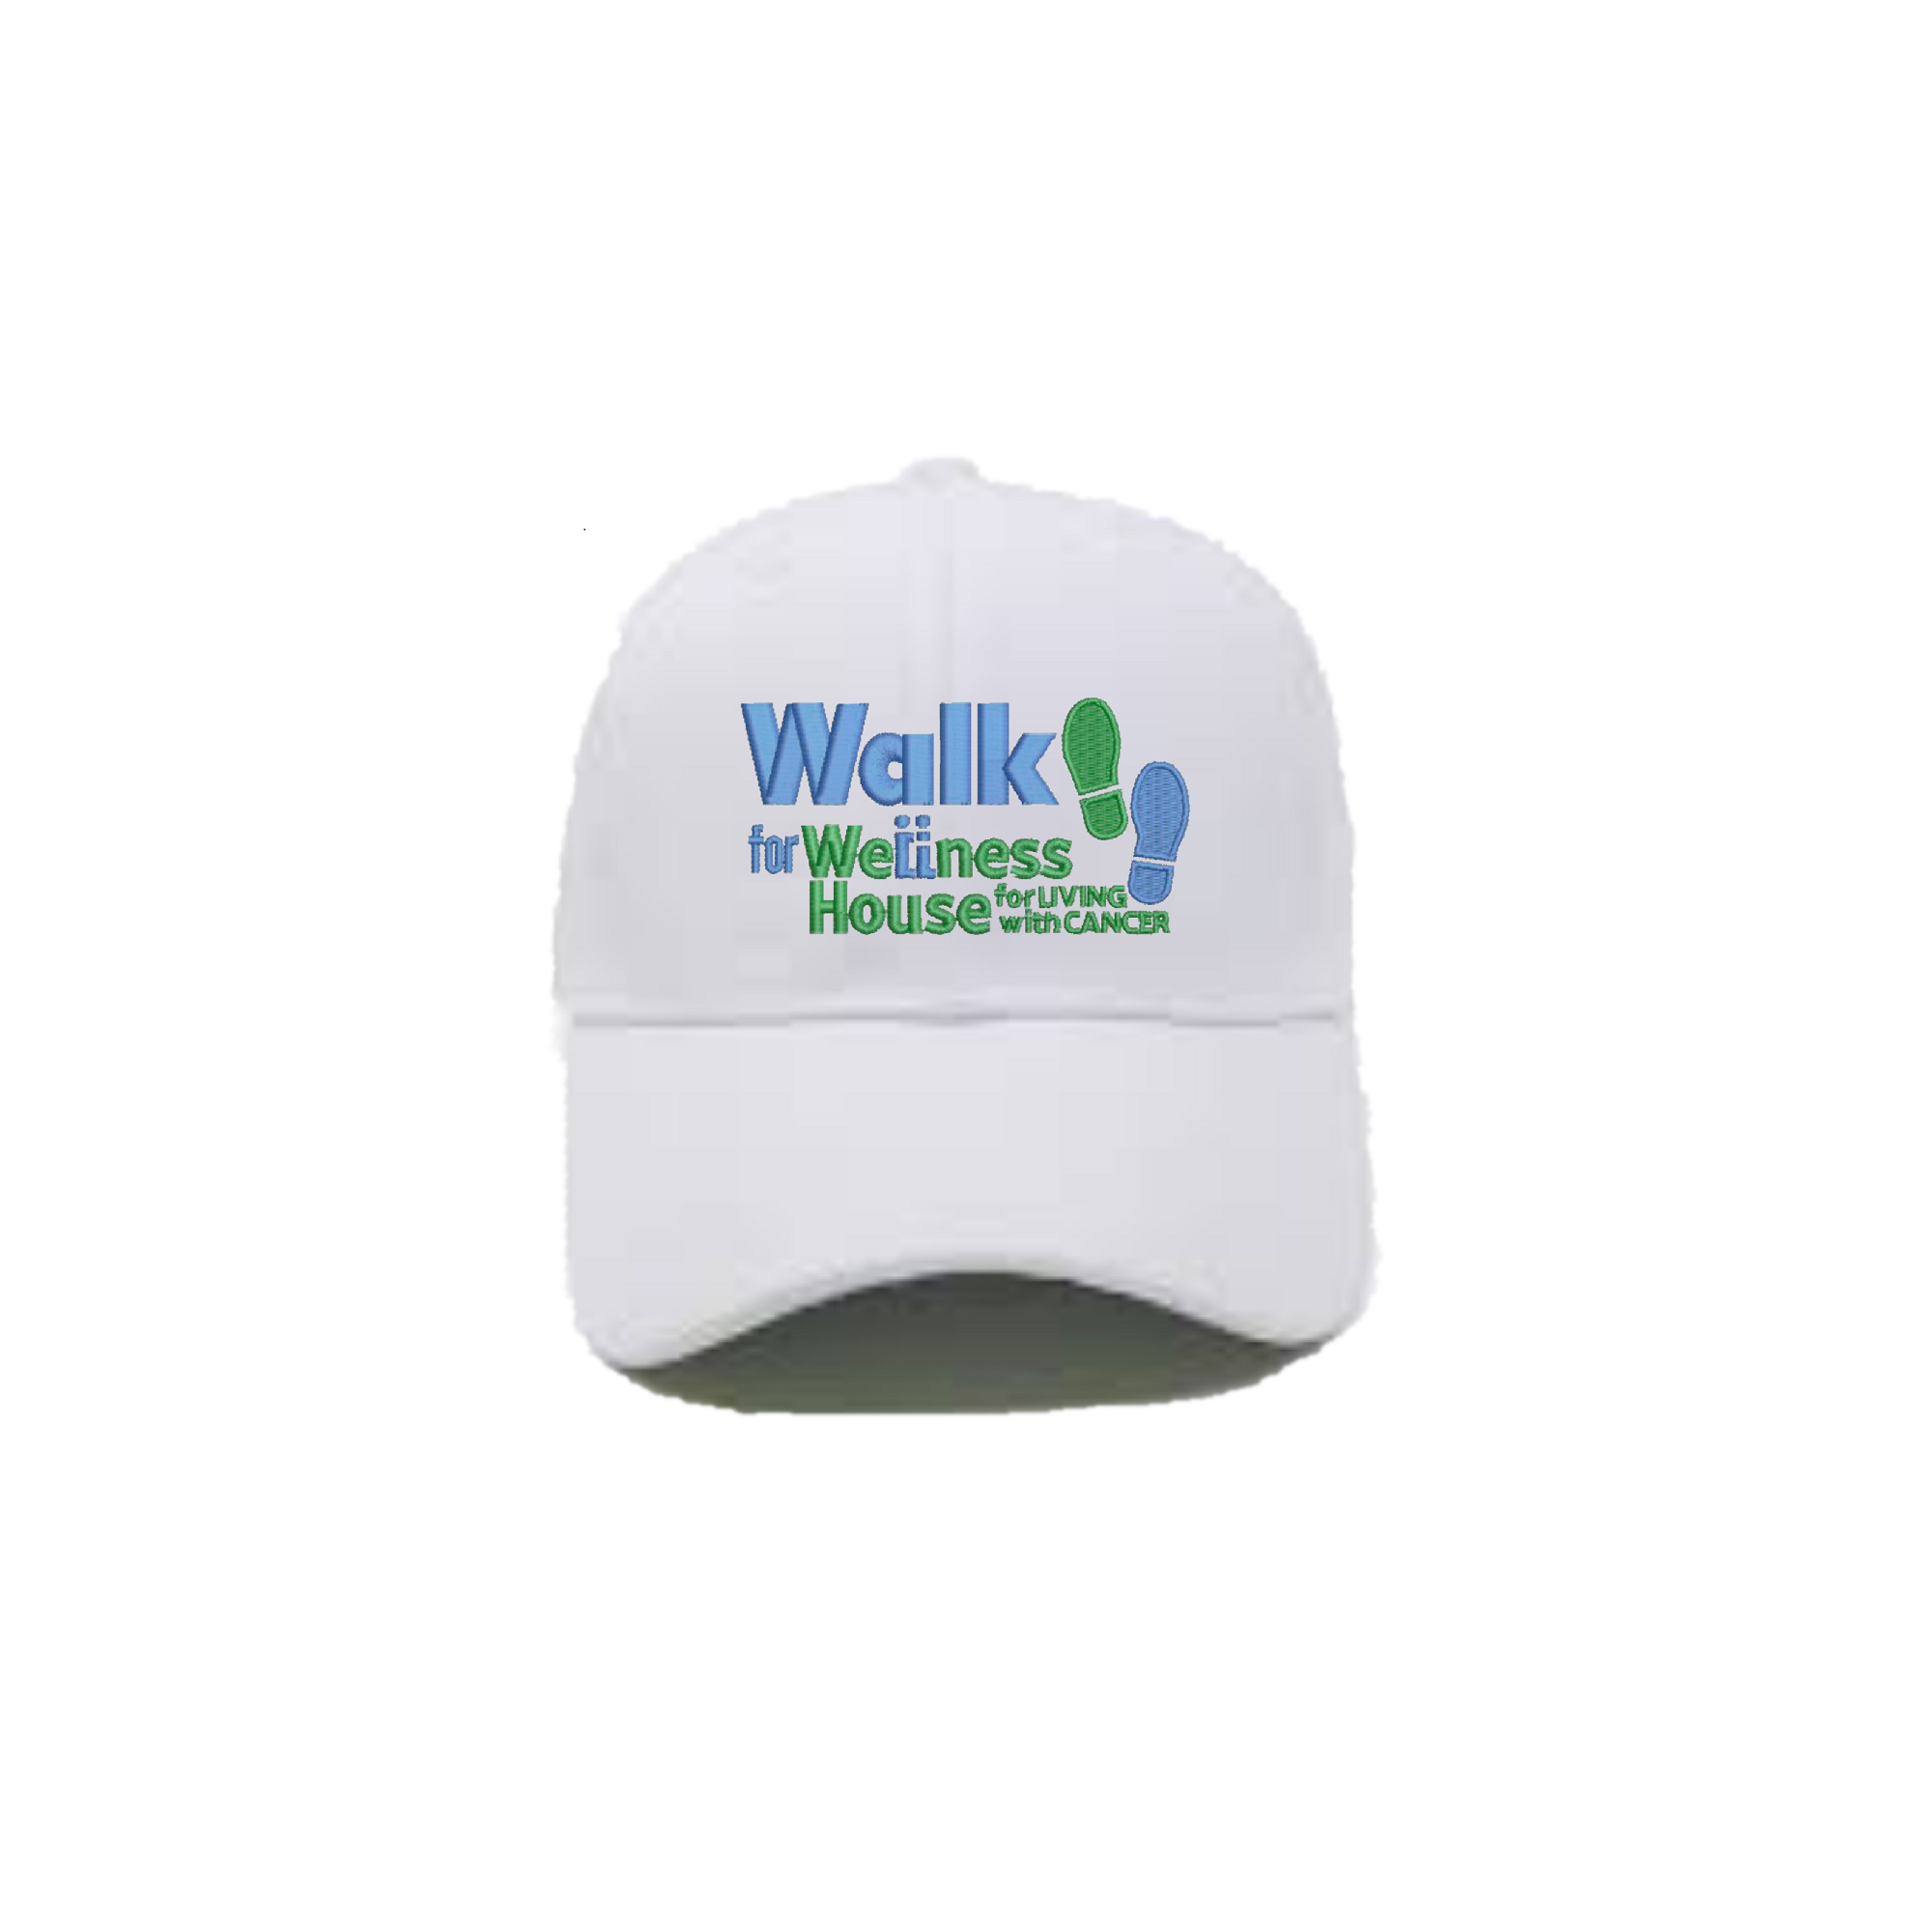 $100 Fundraising Incentive - HAT